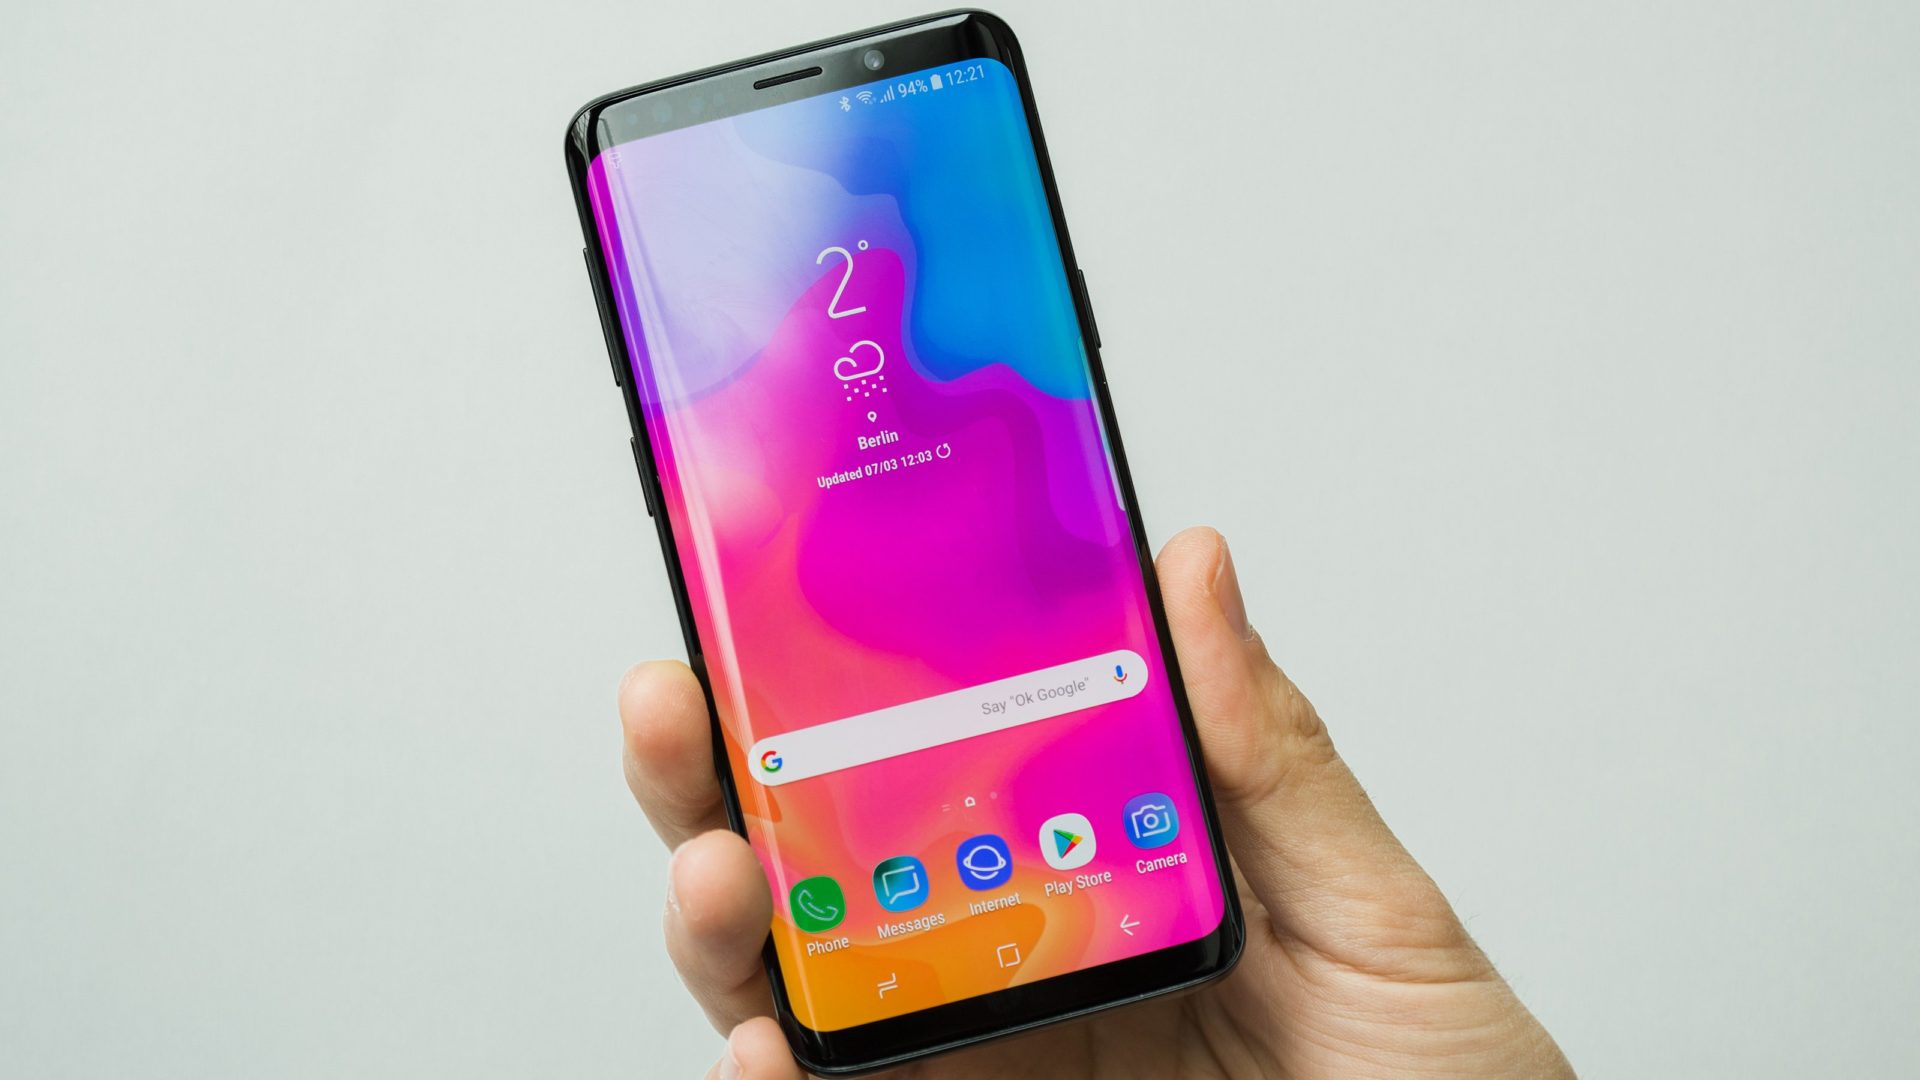 Samsung Could Be Developing a Bitcoin (BTC) and Crypto Wallet App for The Galaxy S10 13